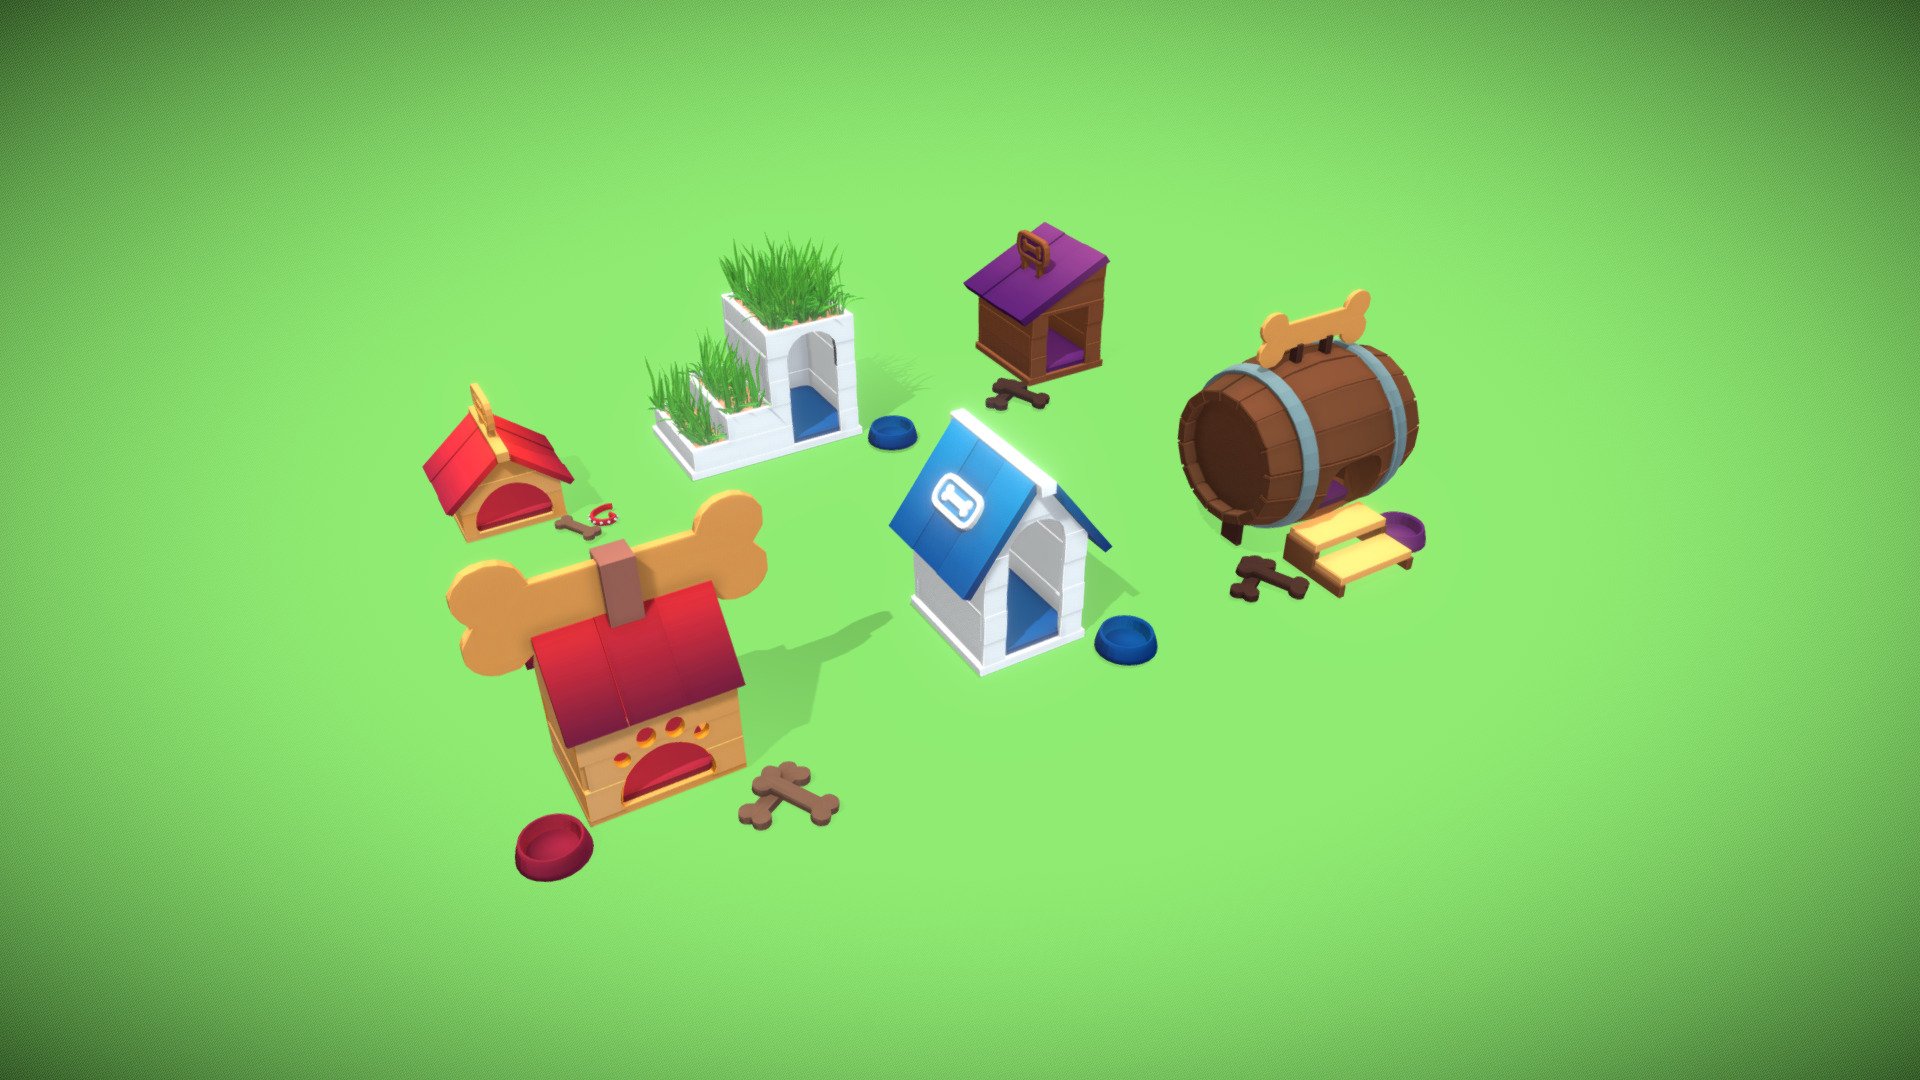 Game-ready  models made in Blender.

Btw I'm looking for a job as an Art Generalist for Hyper Casual games or a 3D artist. Check out my Hyper Casual 3D portfolio and Hyper Casual UI portfolio . Feel free to contact me: marygraz@mail.ru

Thanks for watching! - Dog Houses Low Poly - 3D model by MaryGraz 3d model